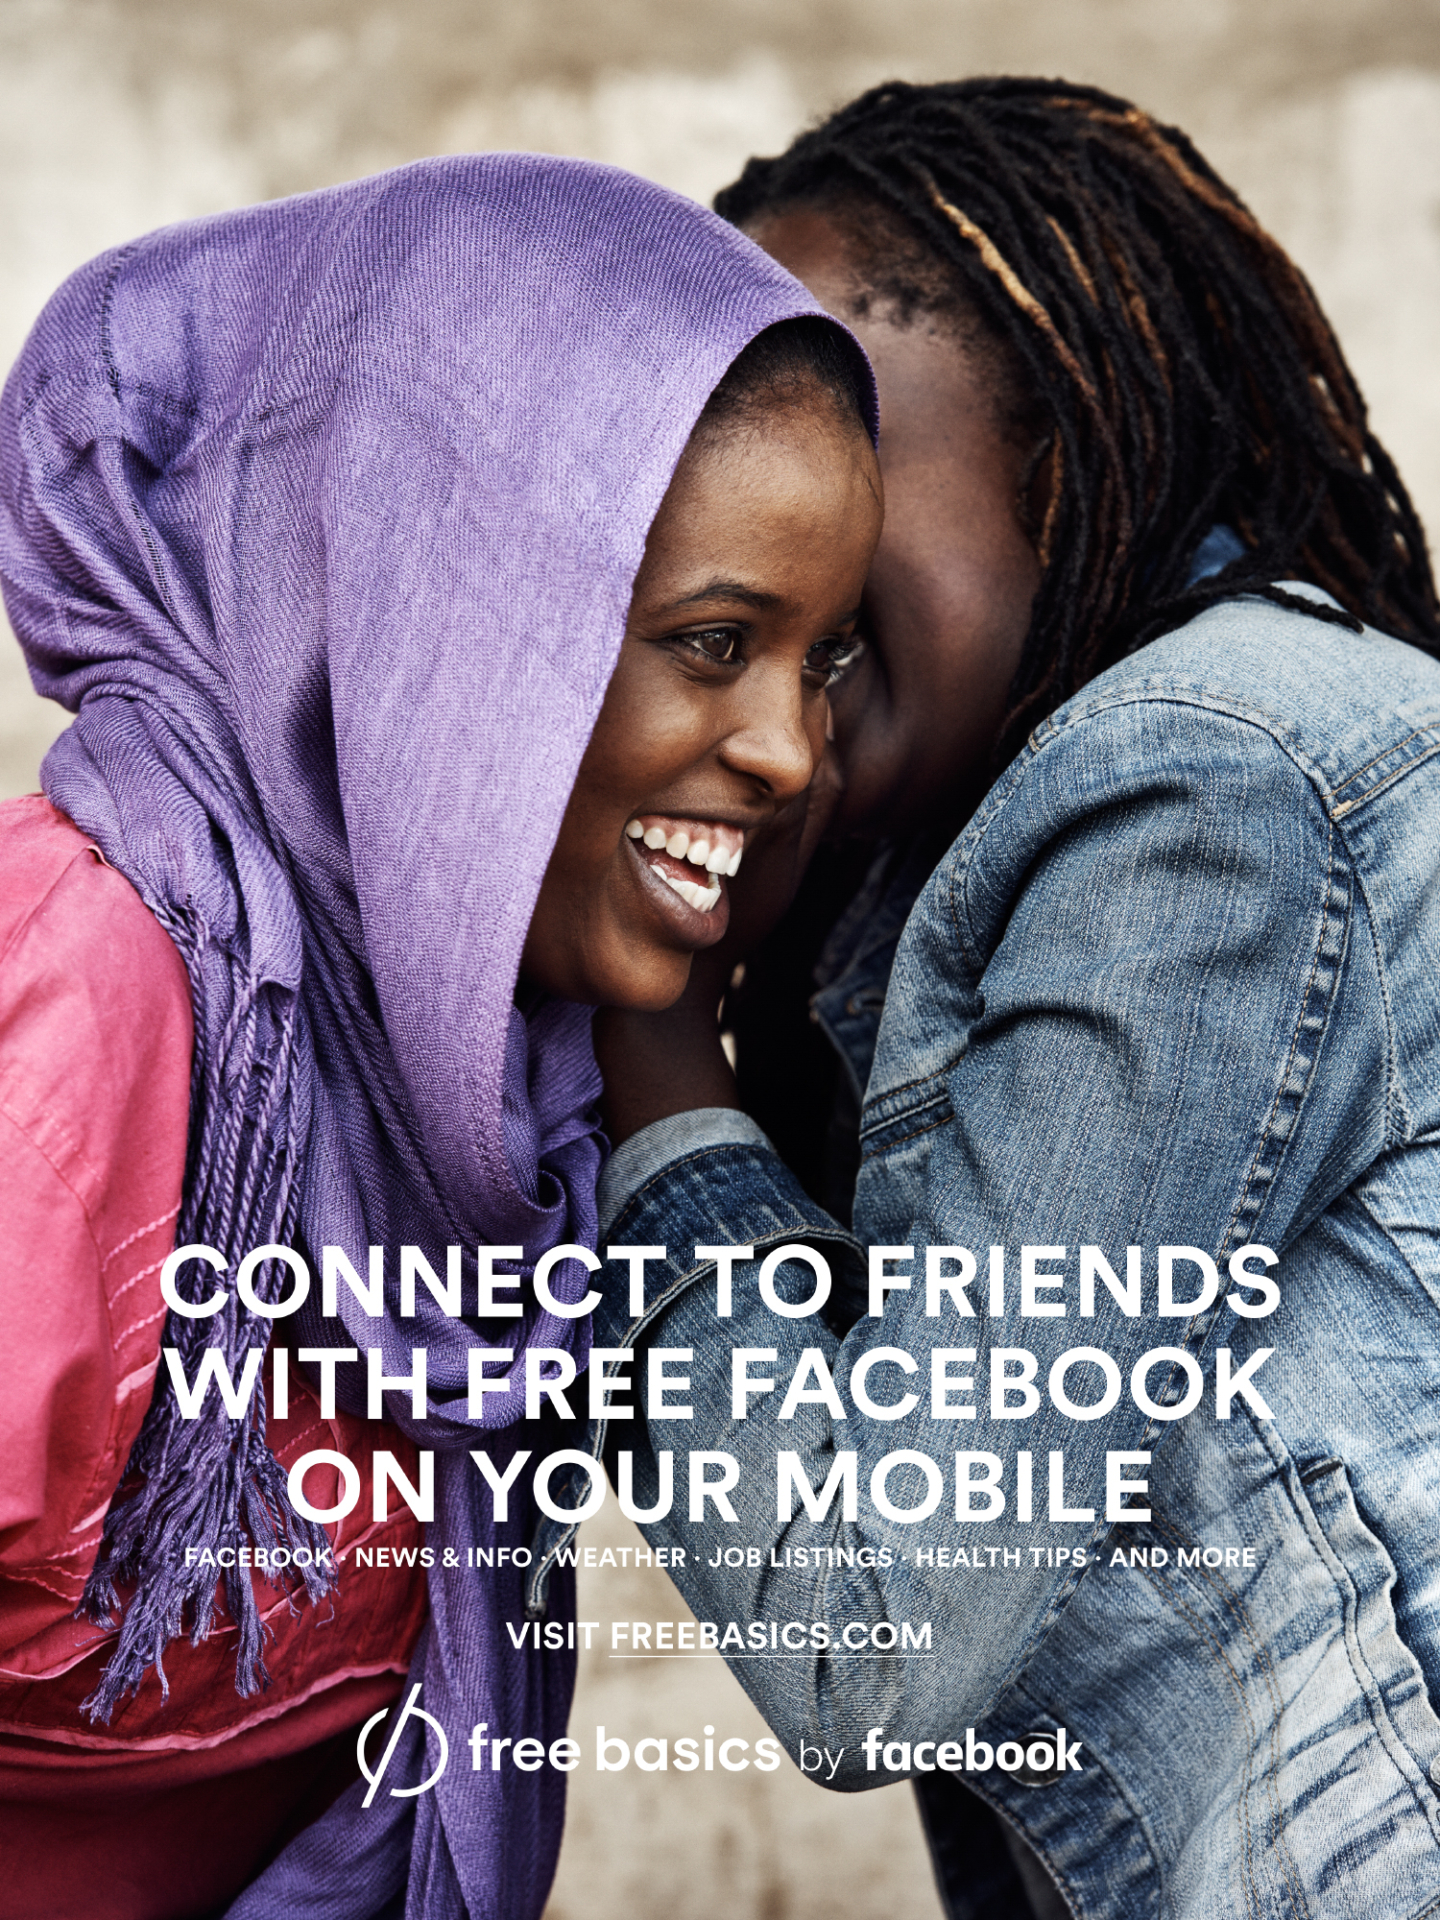 free basics by facebook